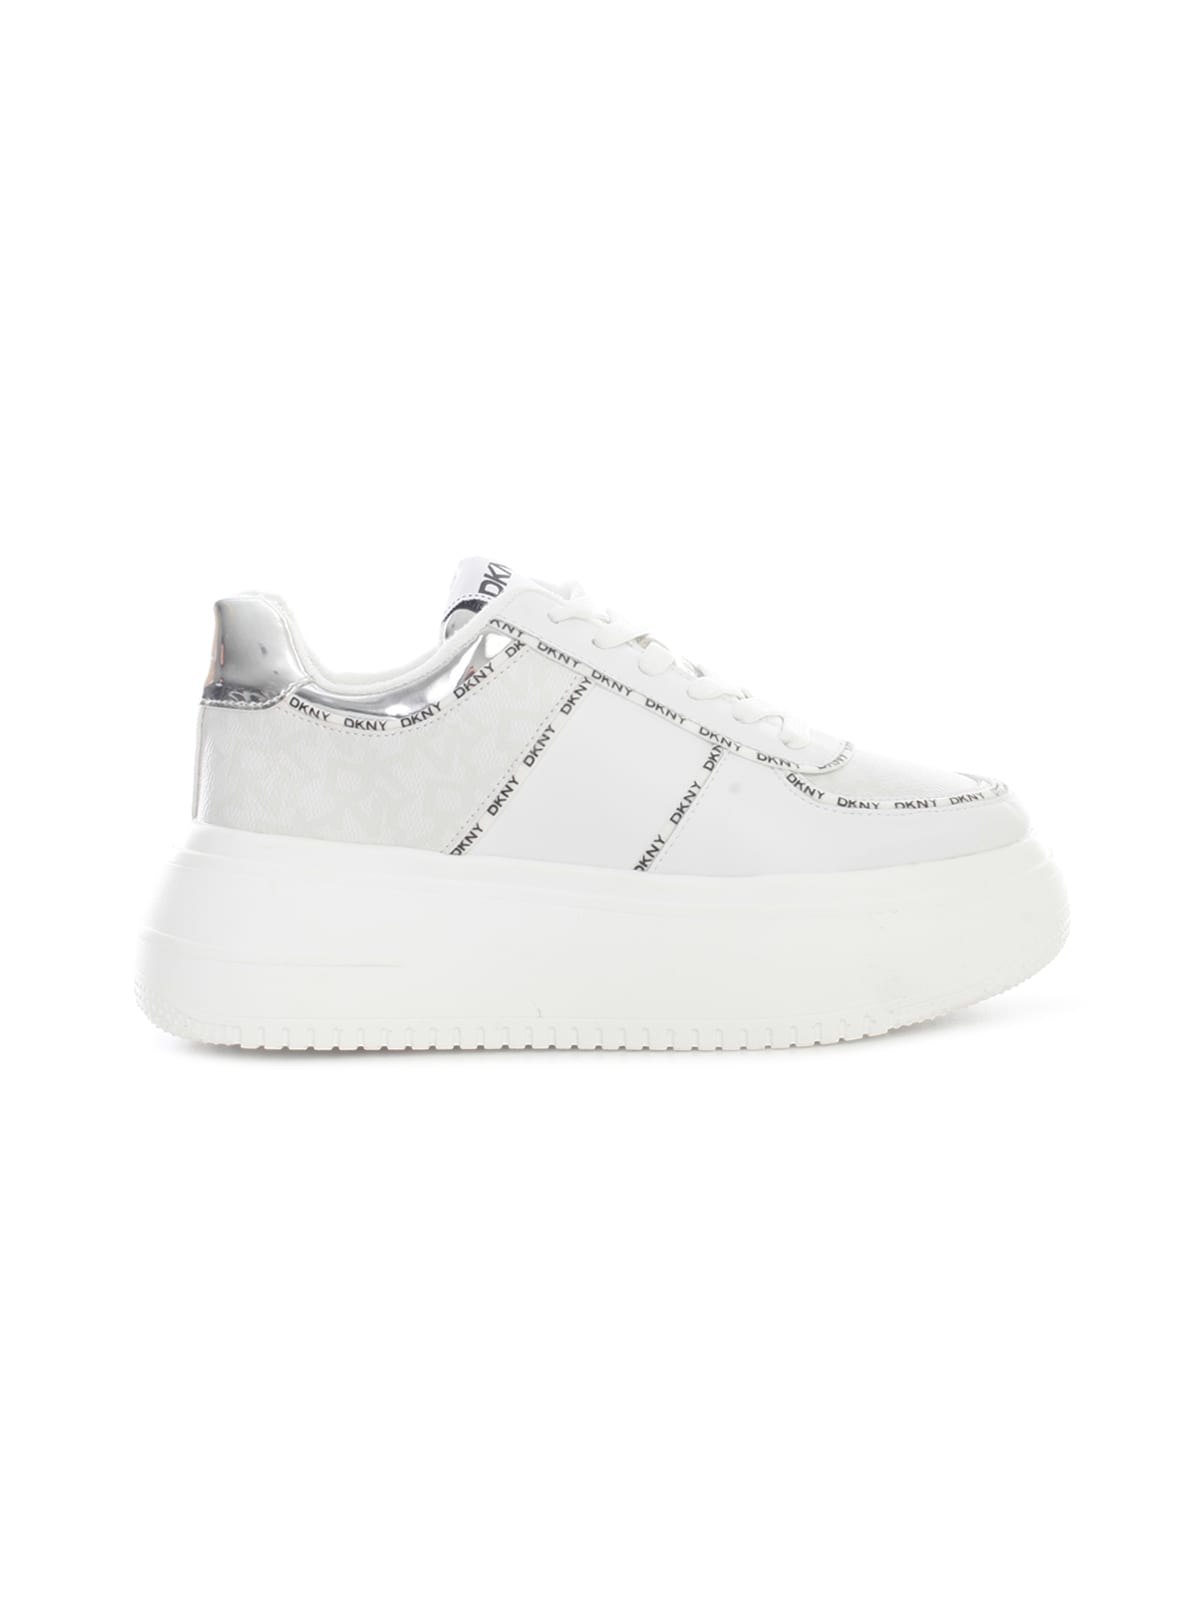 DKNY Maia Lace Up Sneaker 63mm